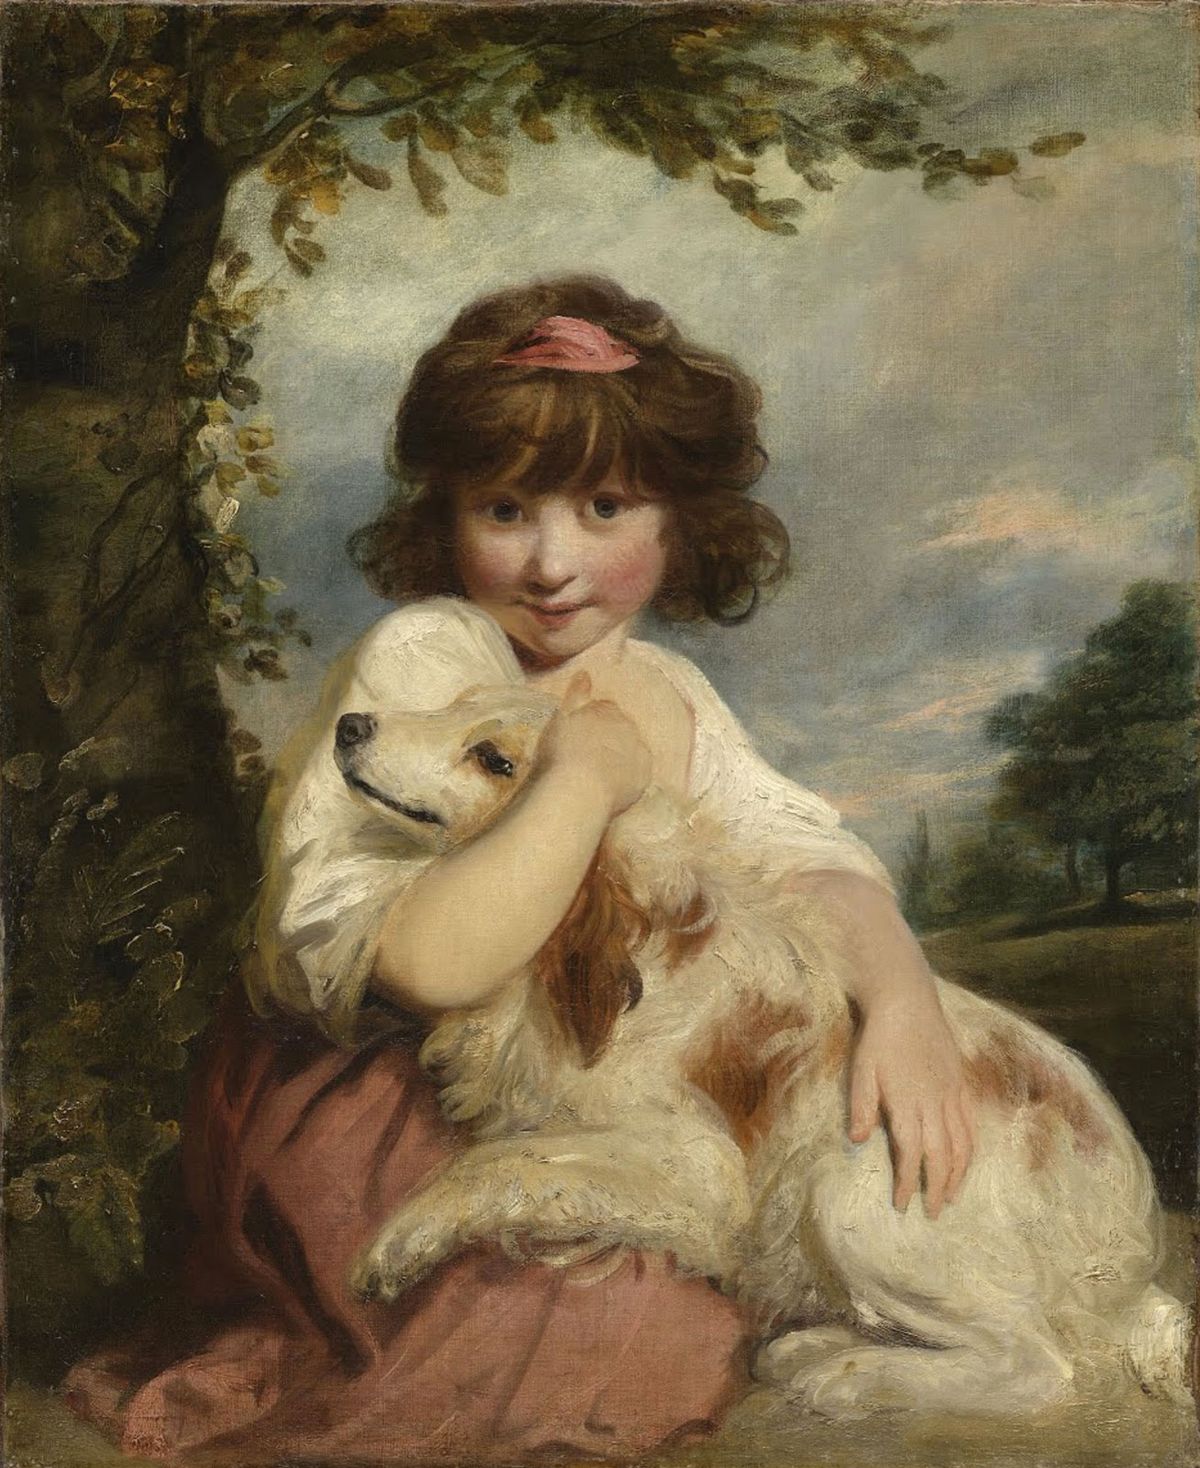 Art Recovery International alleges that Joshua Reynolds's the "Portrait of Miss Mathew, later Lady Elizabeth Mathew, sitting with her dog before a landscape" was stolen from the home of Sir Henry and Lady Price in Newick, East Sussex, in 1984 Courtesy of Art Recovery International